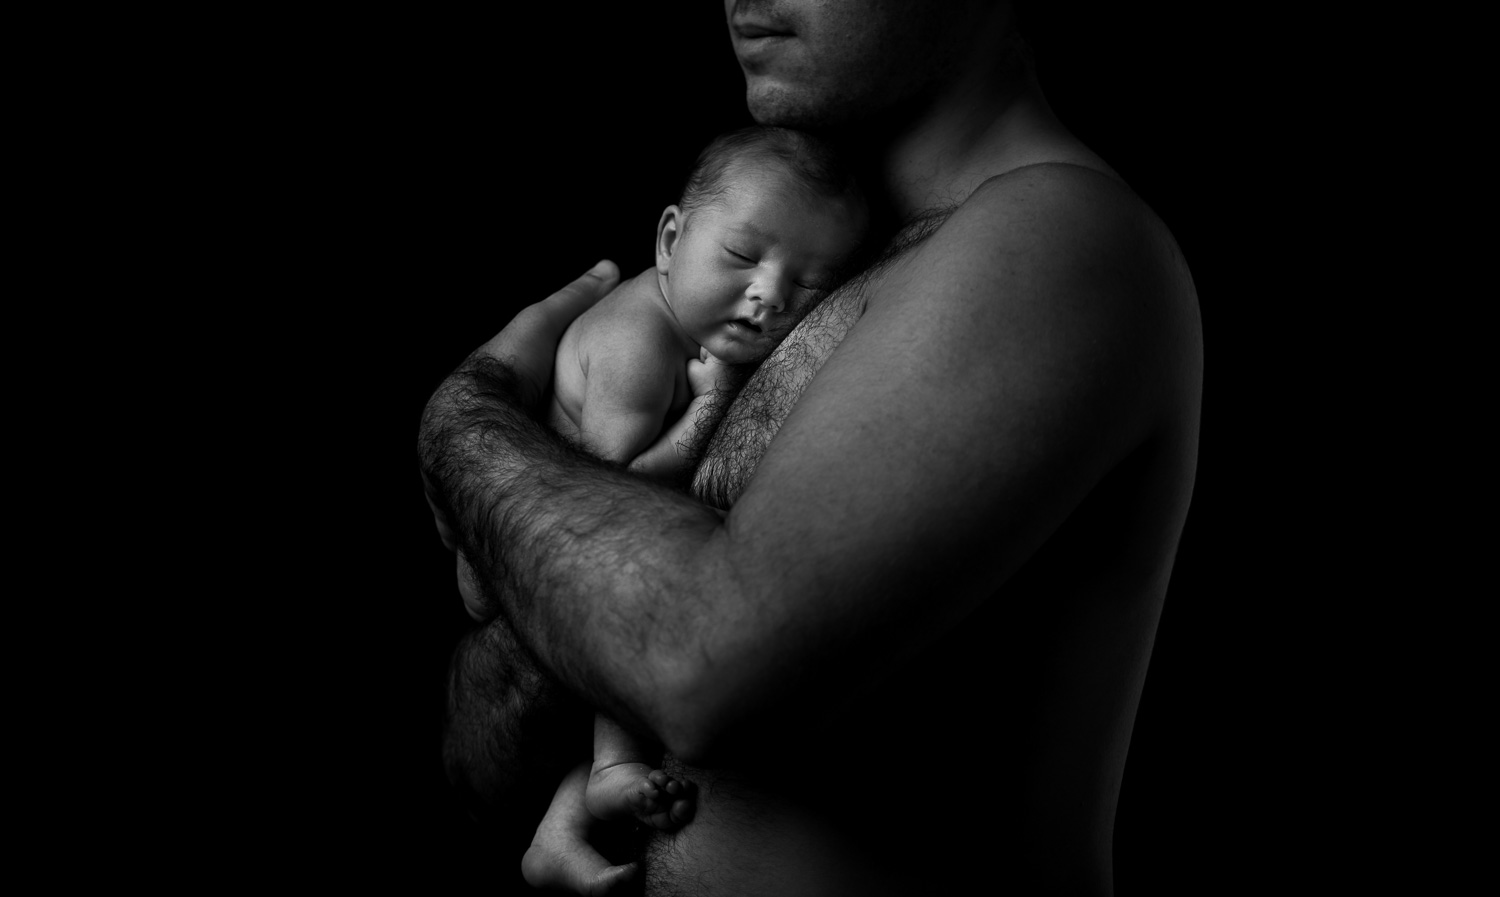 photograph of a dad with his newborn baby